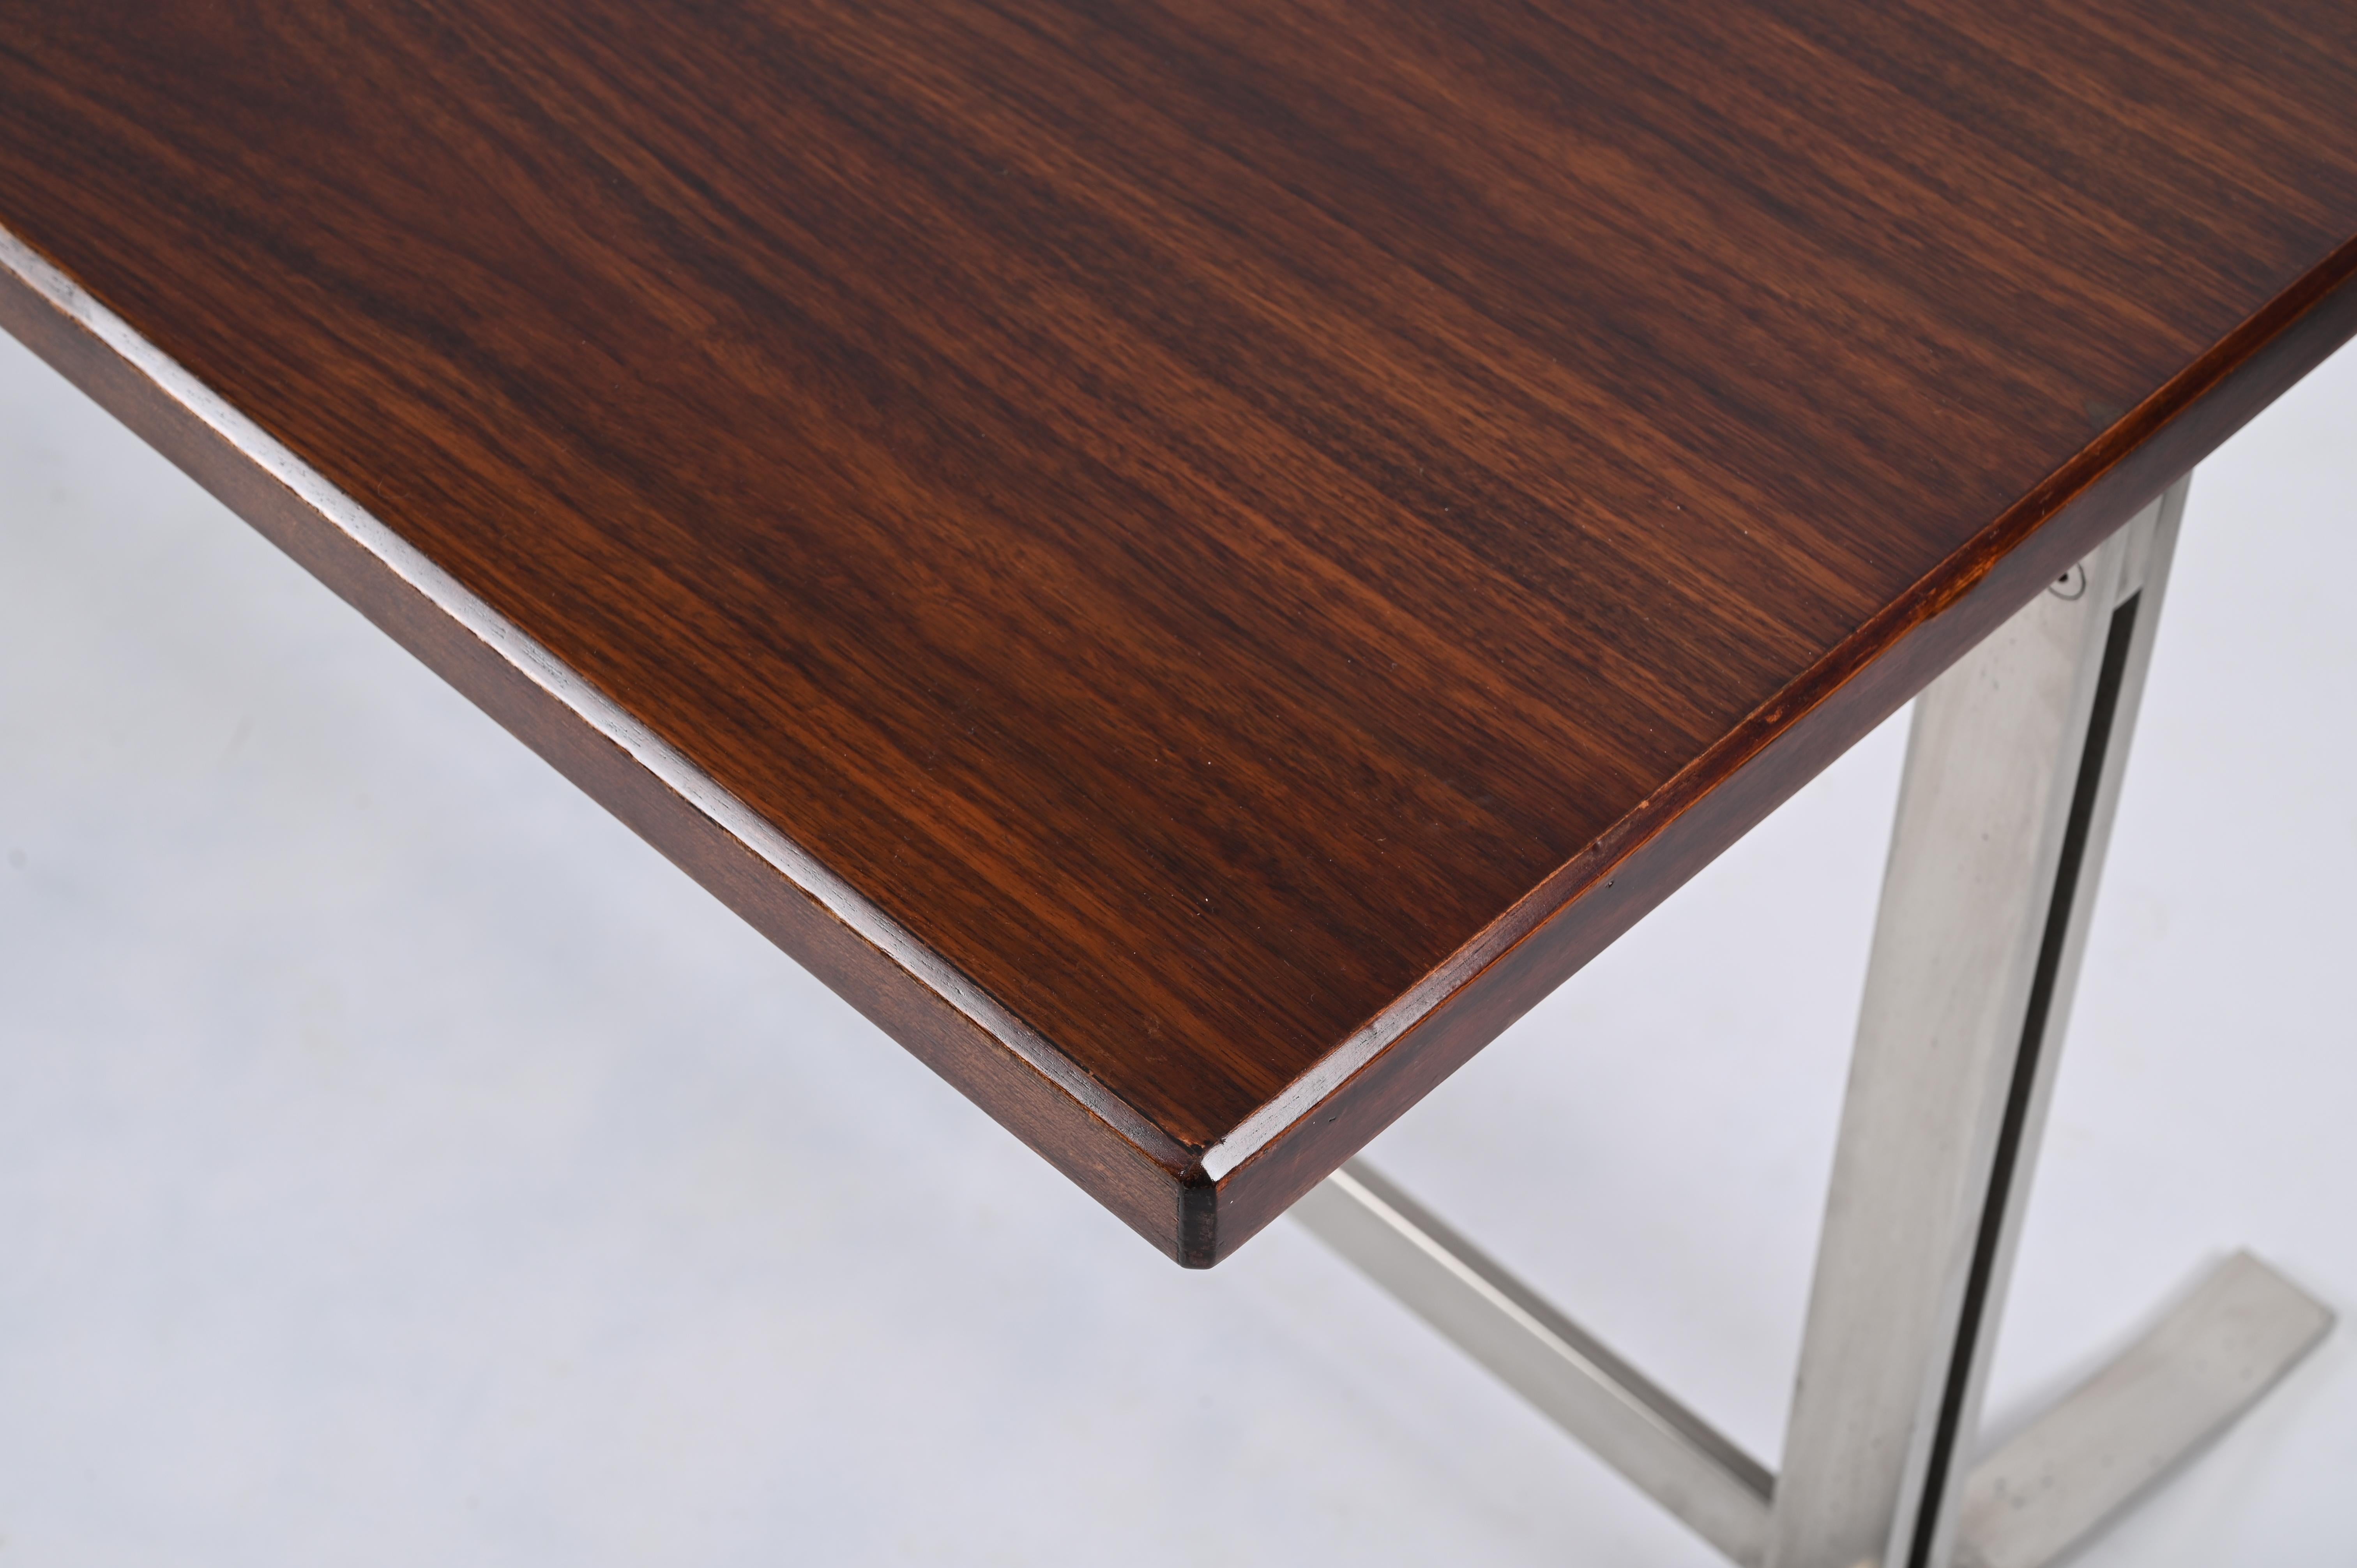 Midcentury Desk in Walnut and Steel by Moscatelli for Formanova, Italy, 1965 For Sale 3